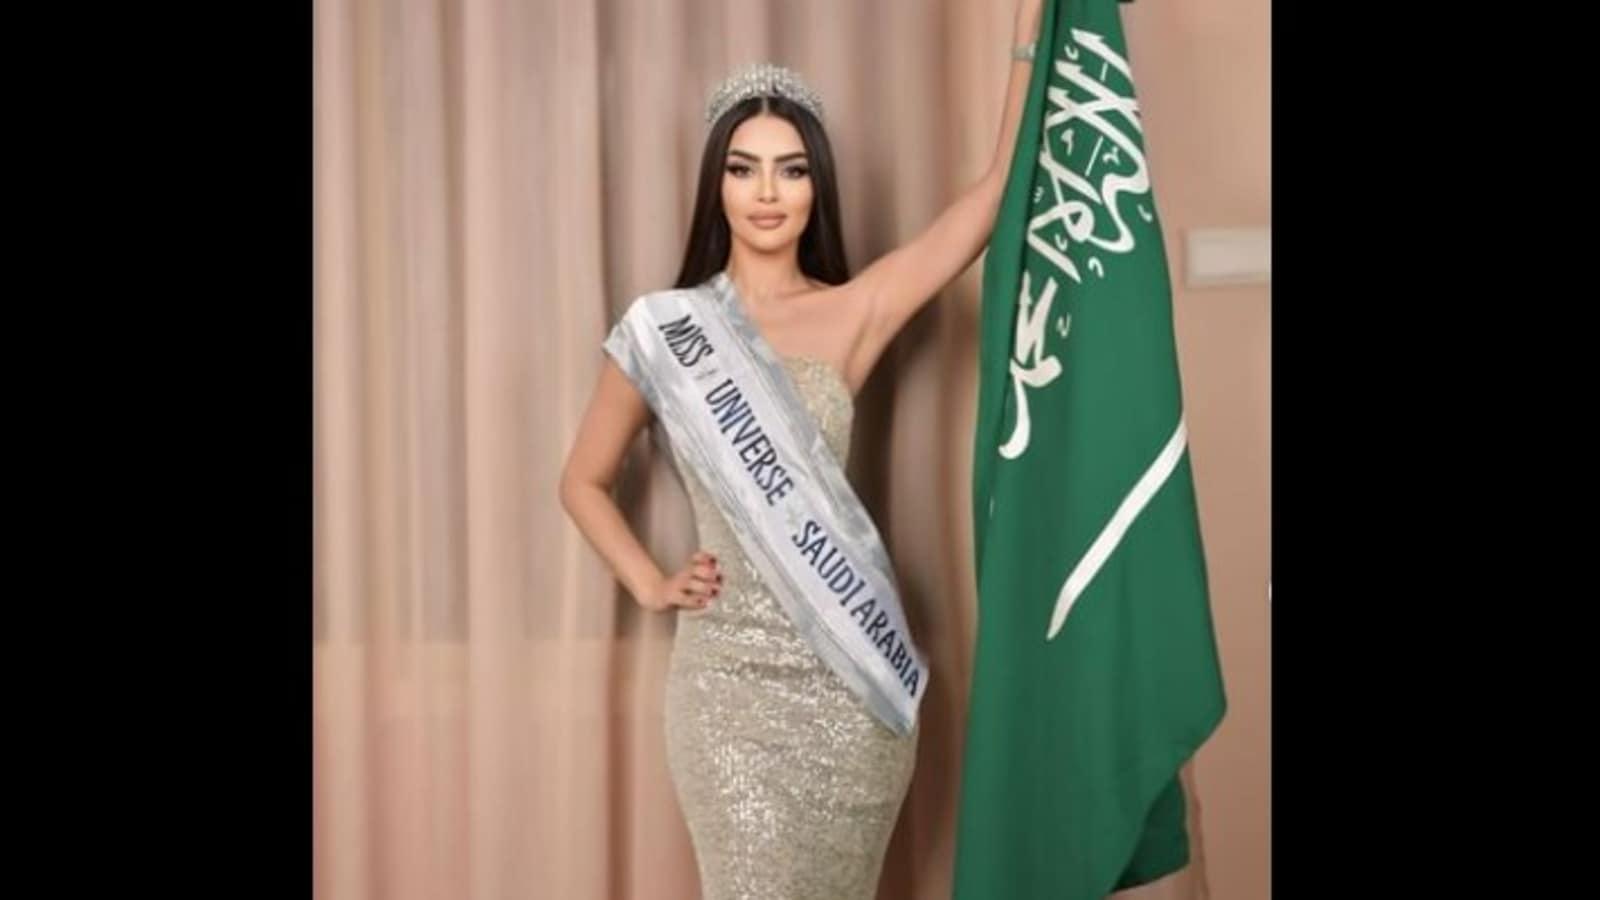 Meet Rumy Alqahtani, a Saudi Arabian model who is the country's first-ever Miss Universe participant